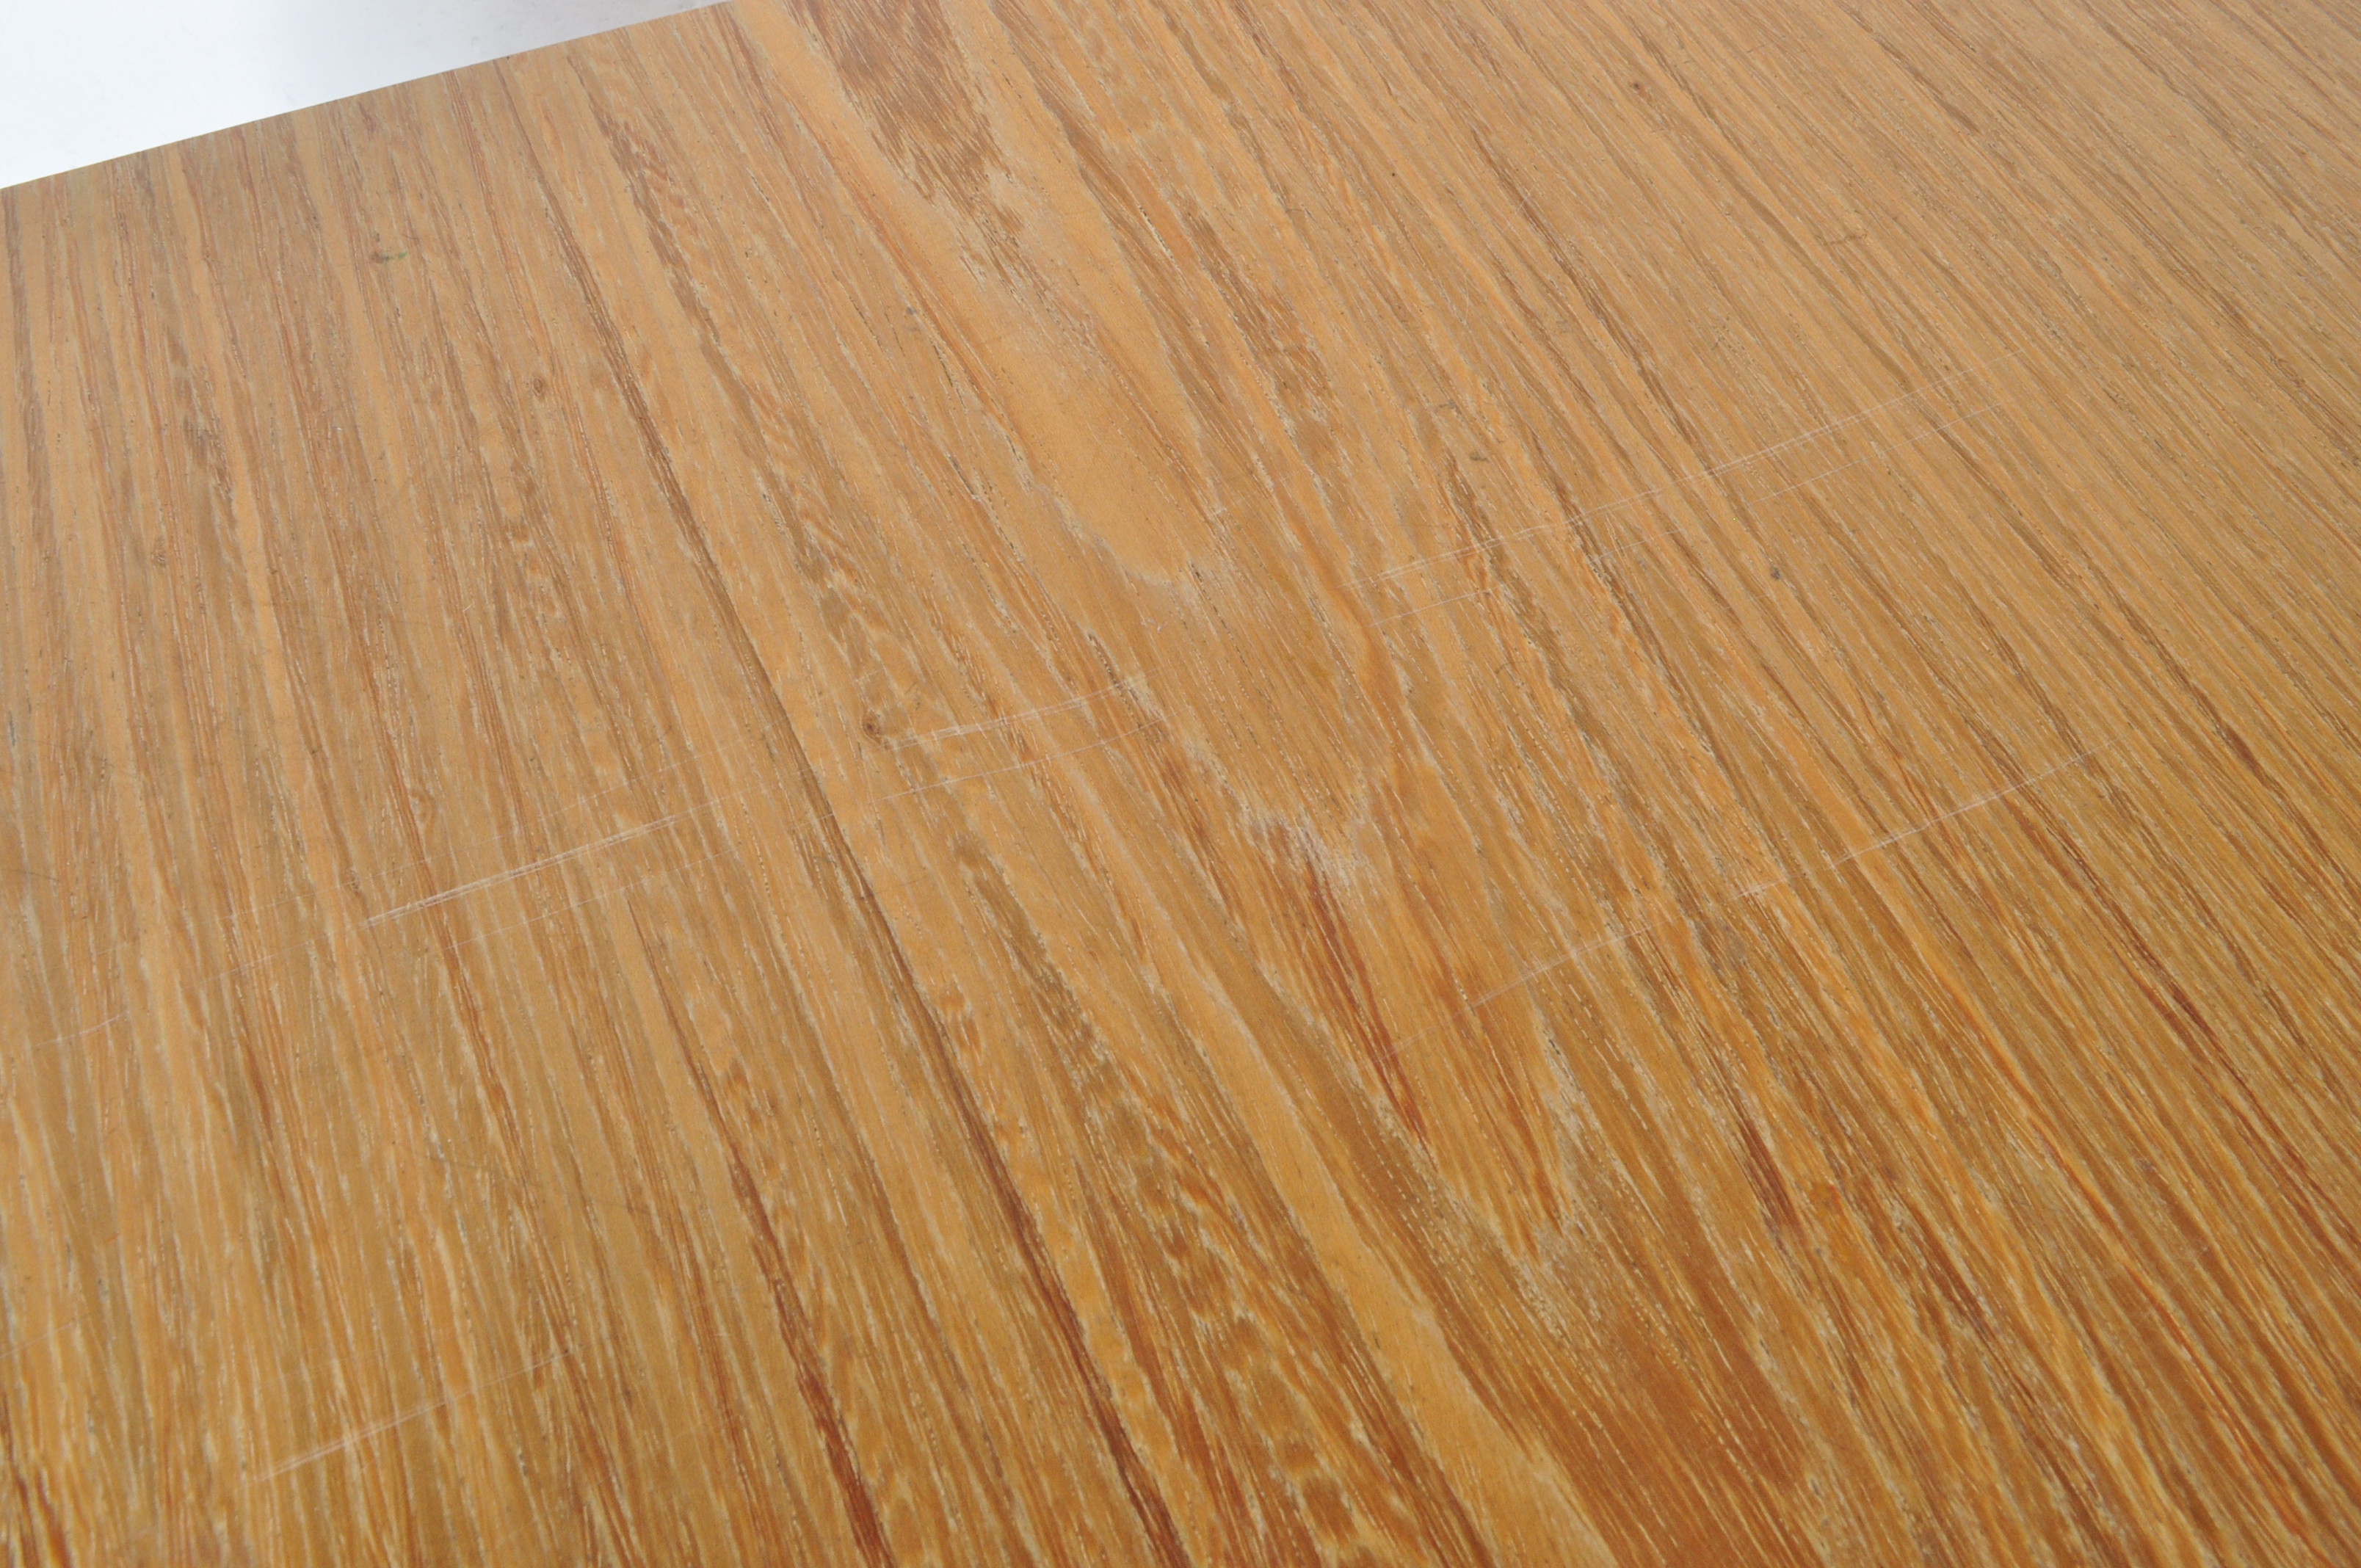 NATHAN FURNITURE - MID CENTURY 1960S DINING TABLE - Image 7 of 7